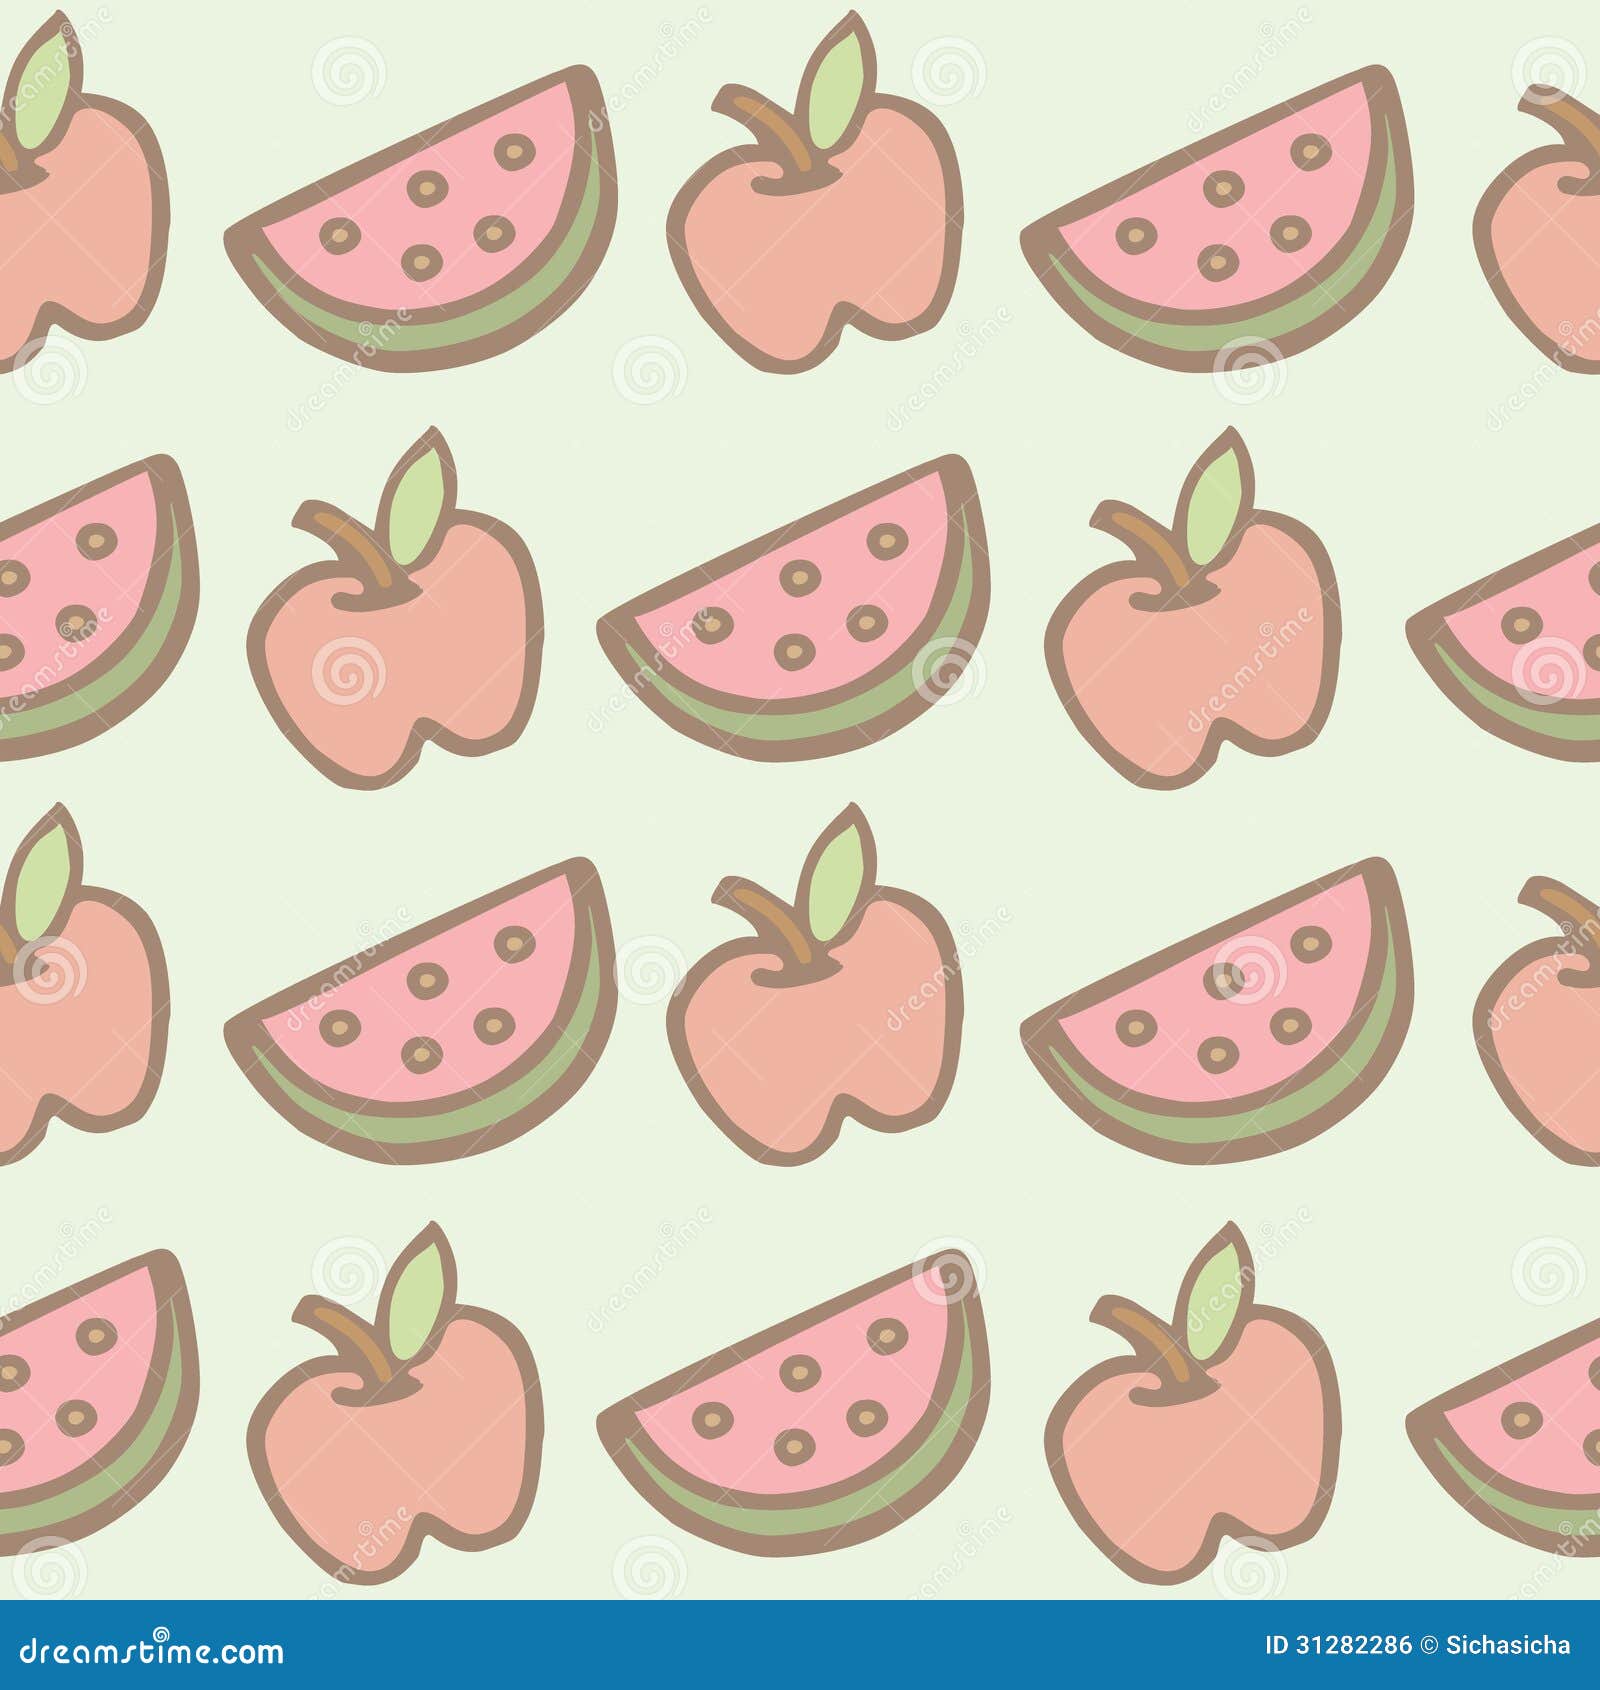 tumblr watermelon backgrounds Apple Royalty Seamless Of Cartoon And Pattern Watermelon